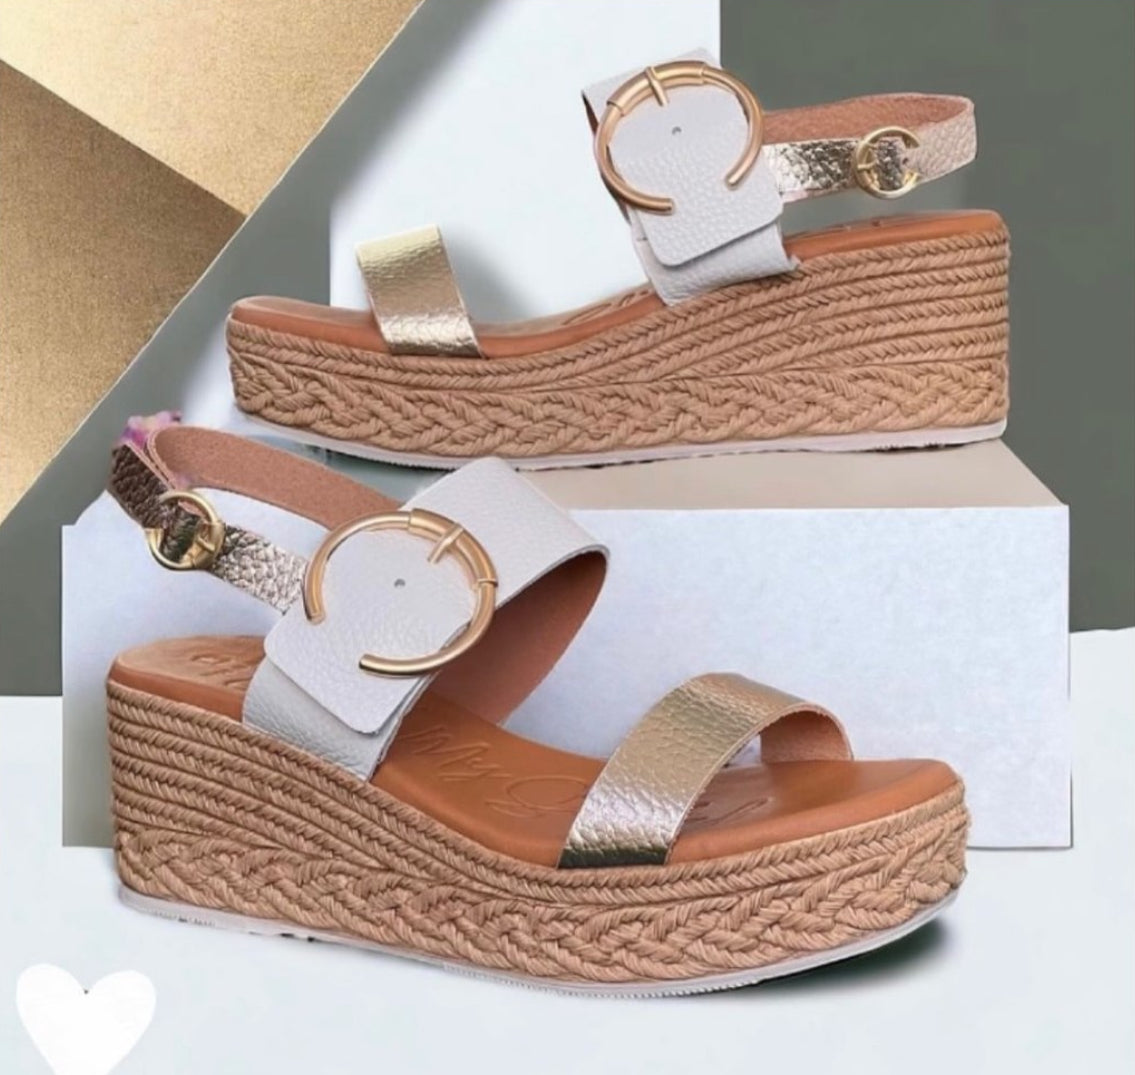 Oh My Sandals - 5455 White and Gold Wedge